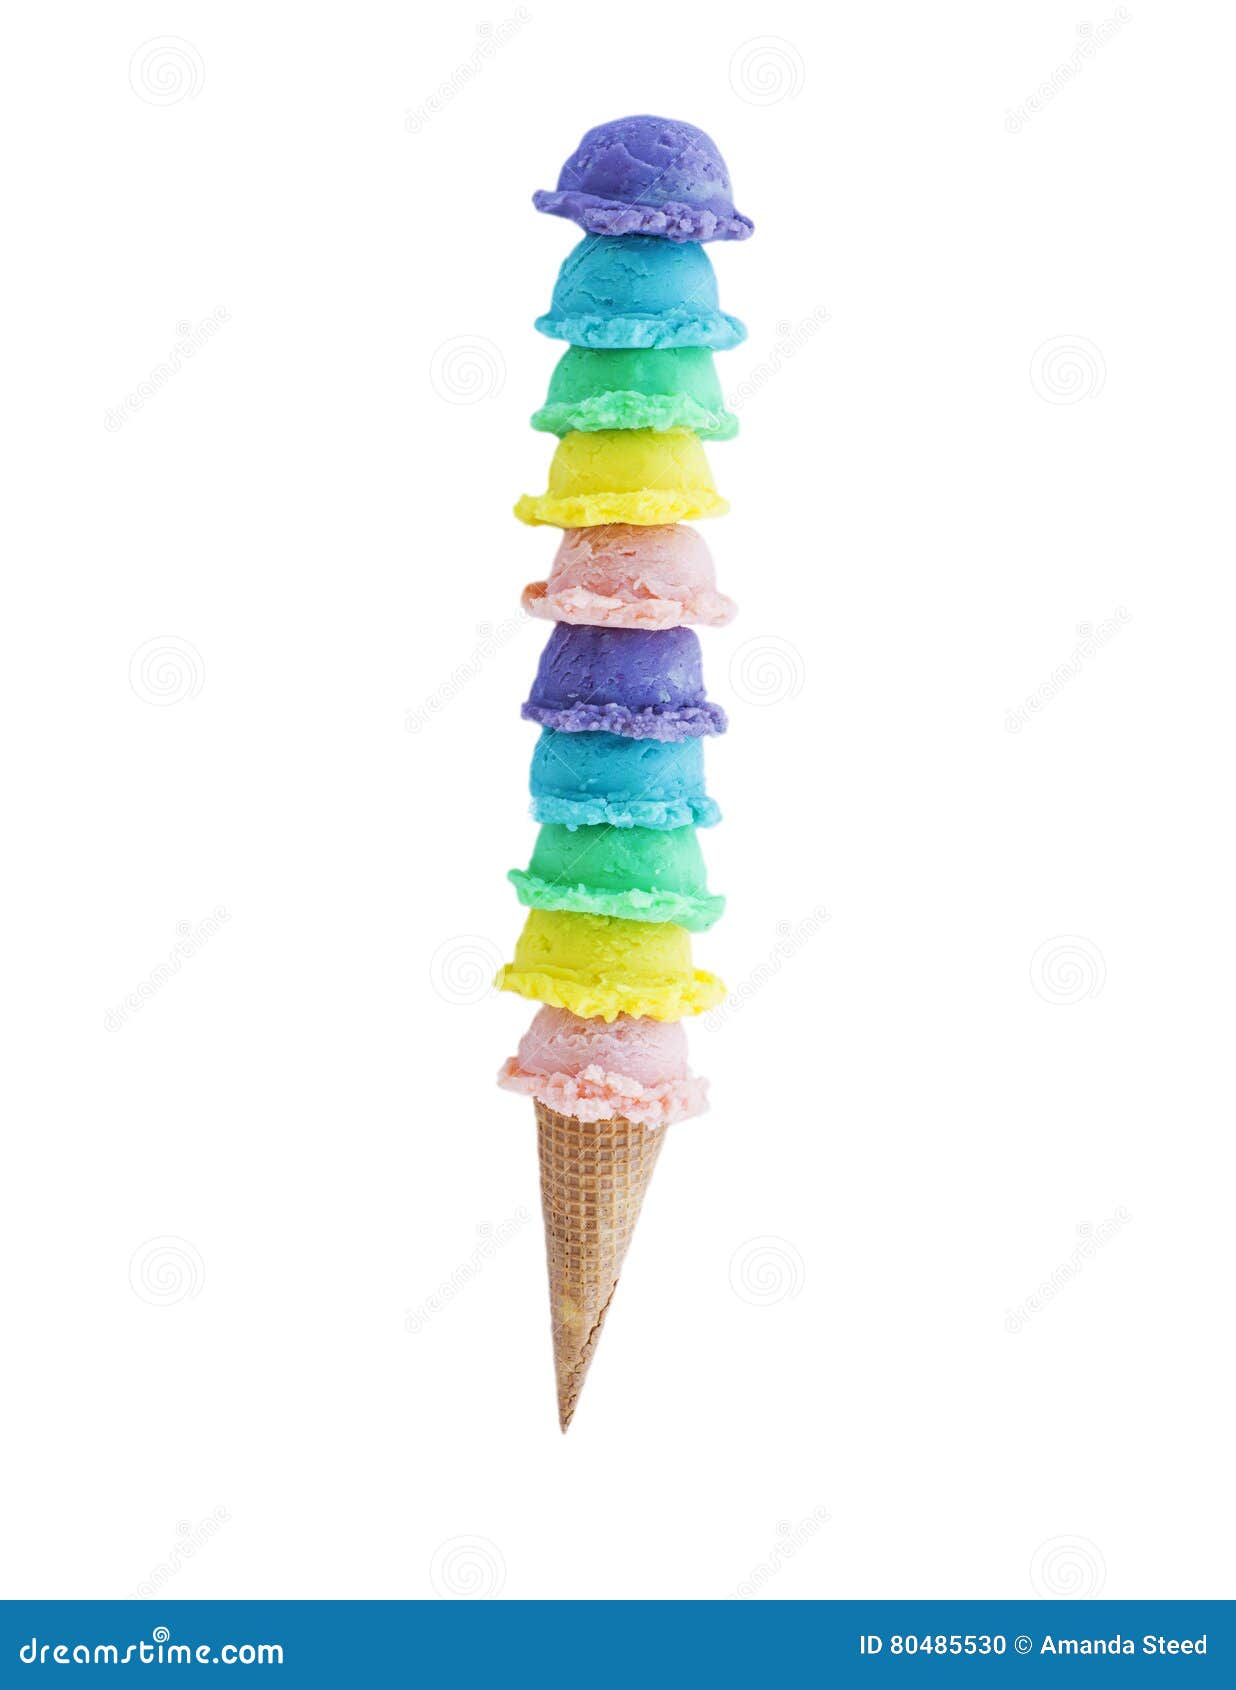 https://thumbs.dreamstime.com/z/extra-large-ice-cream-cone-ten-scoop-isolated-backdrop-80485530.jpg